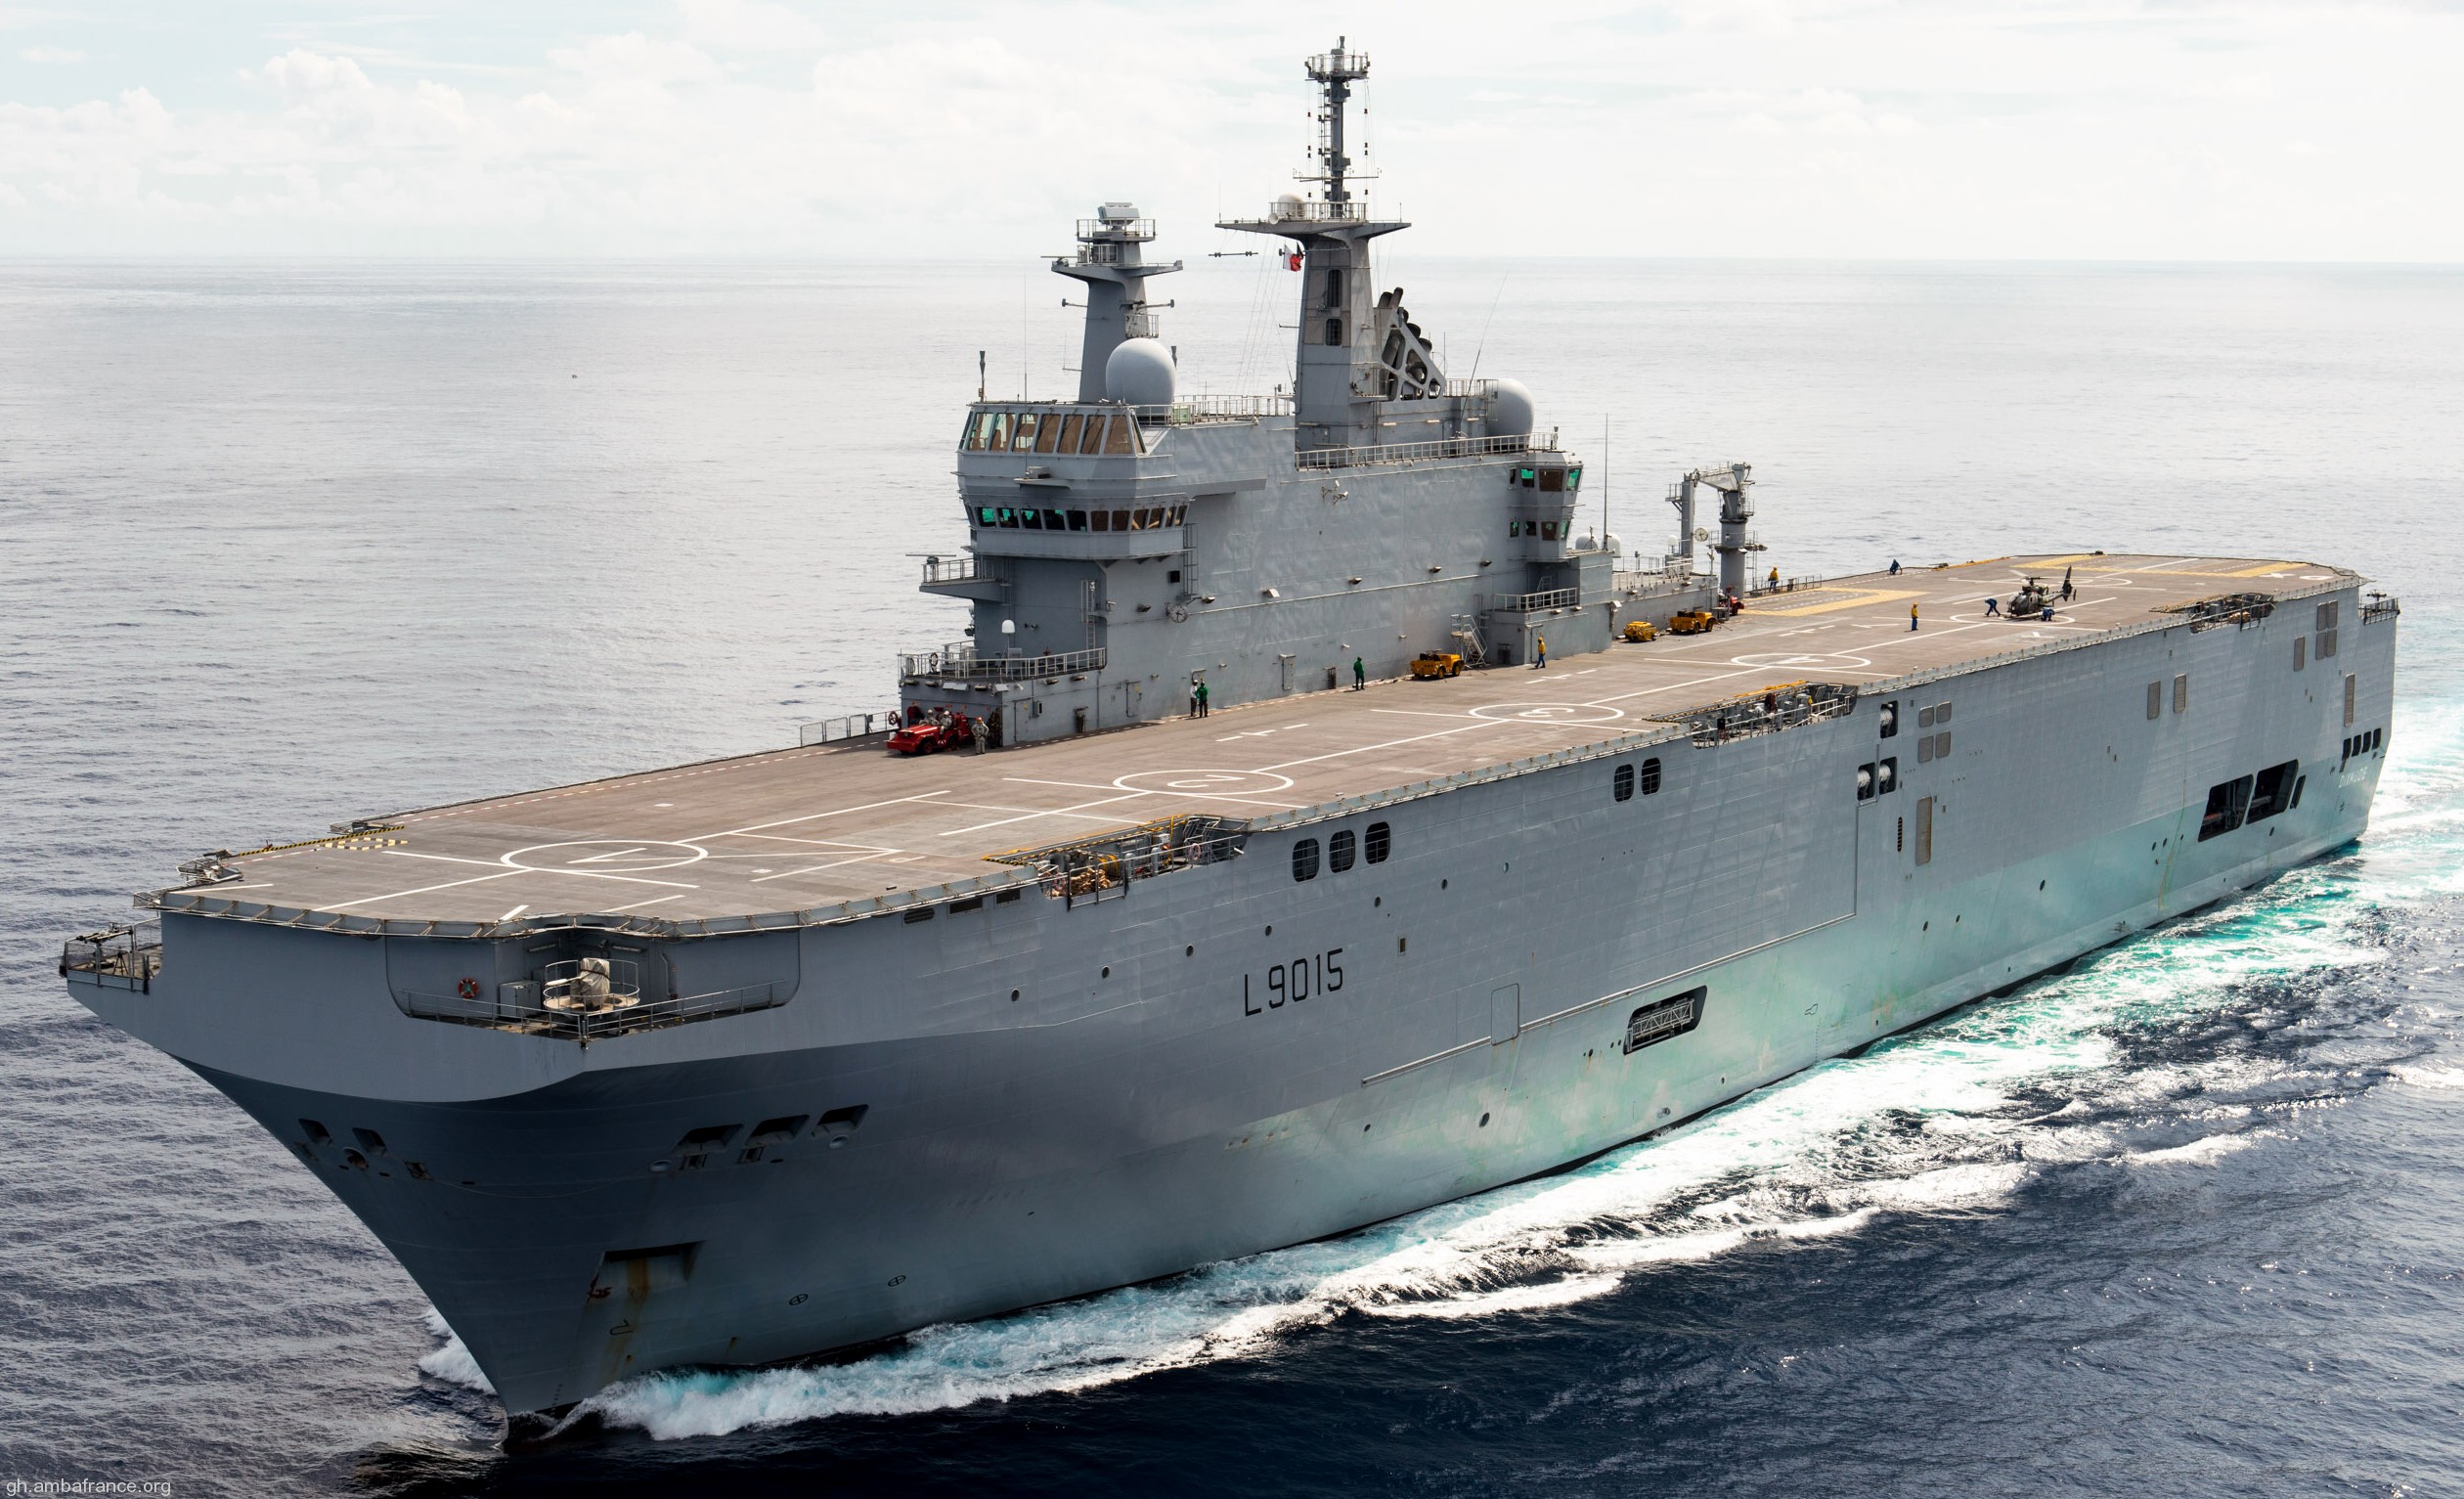 l-9015 fs dixmude mistral class amphibious assault command ship bpc french navy marine nationale 04